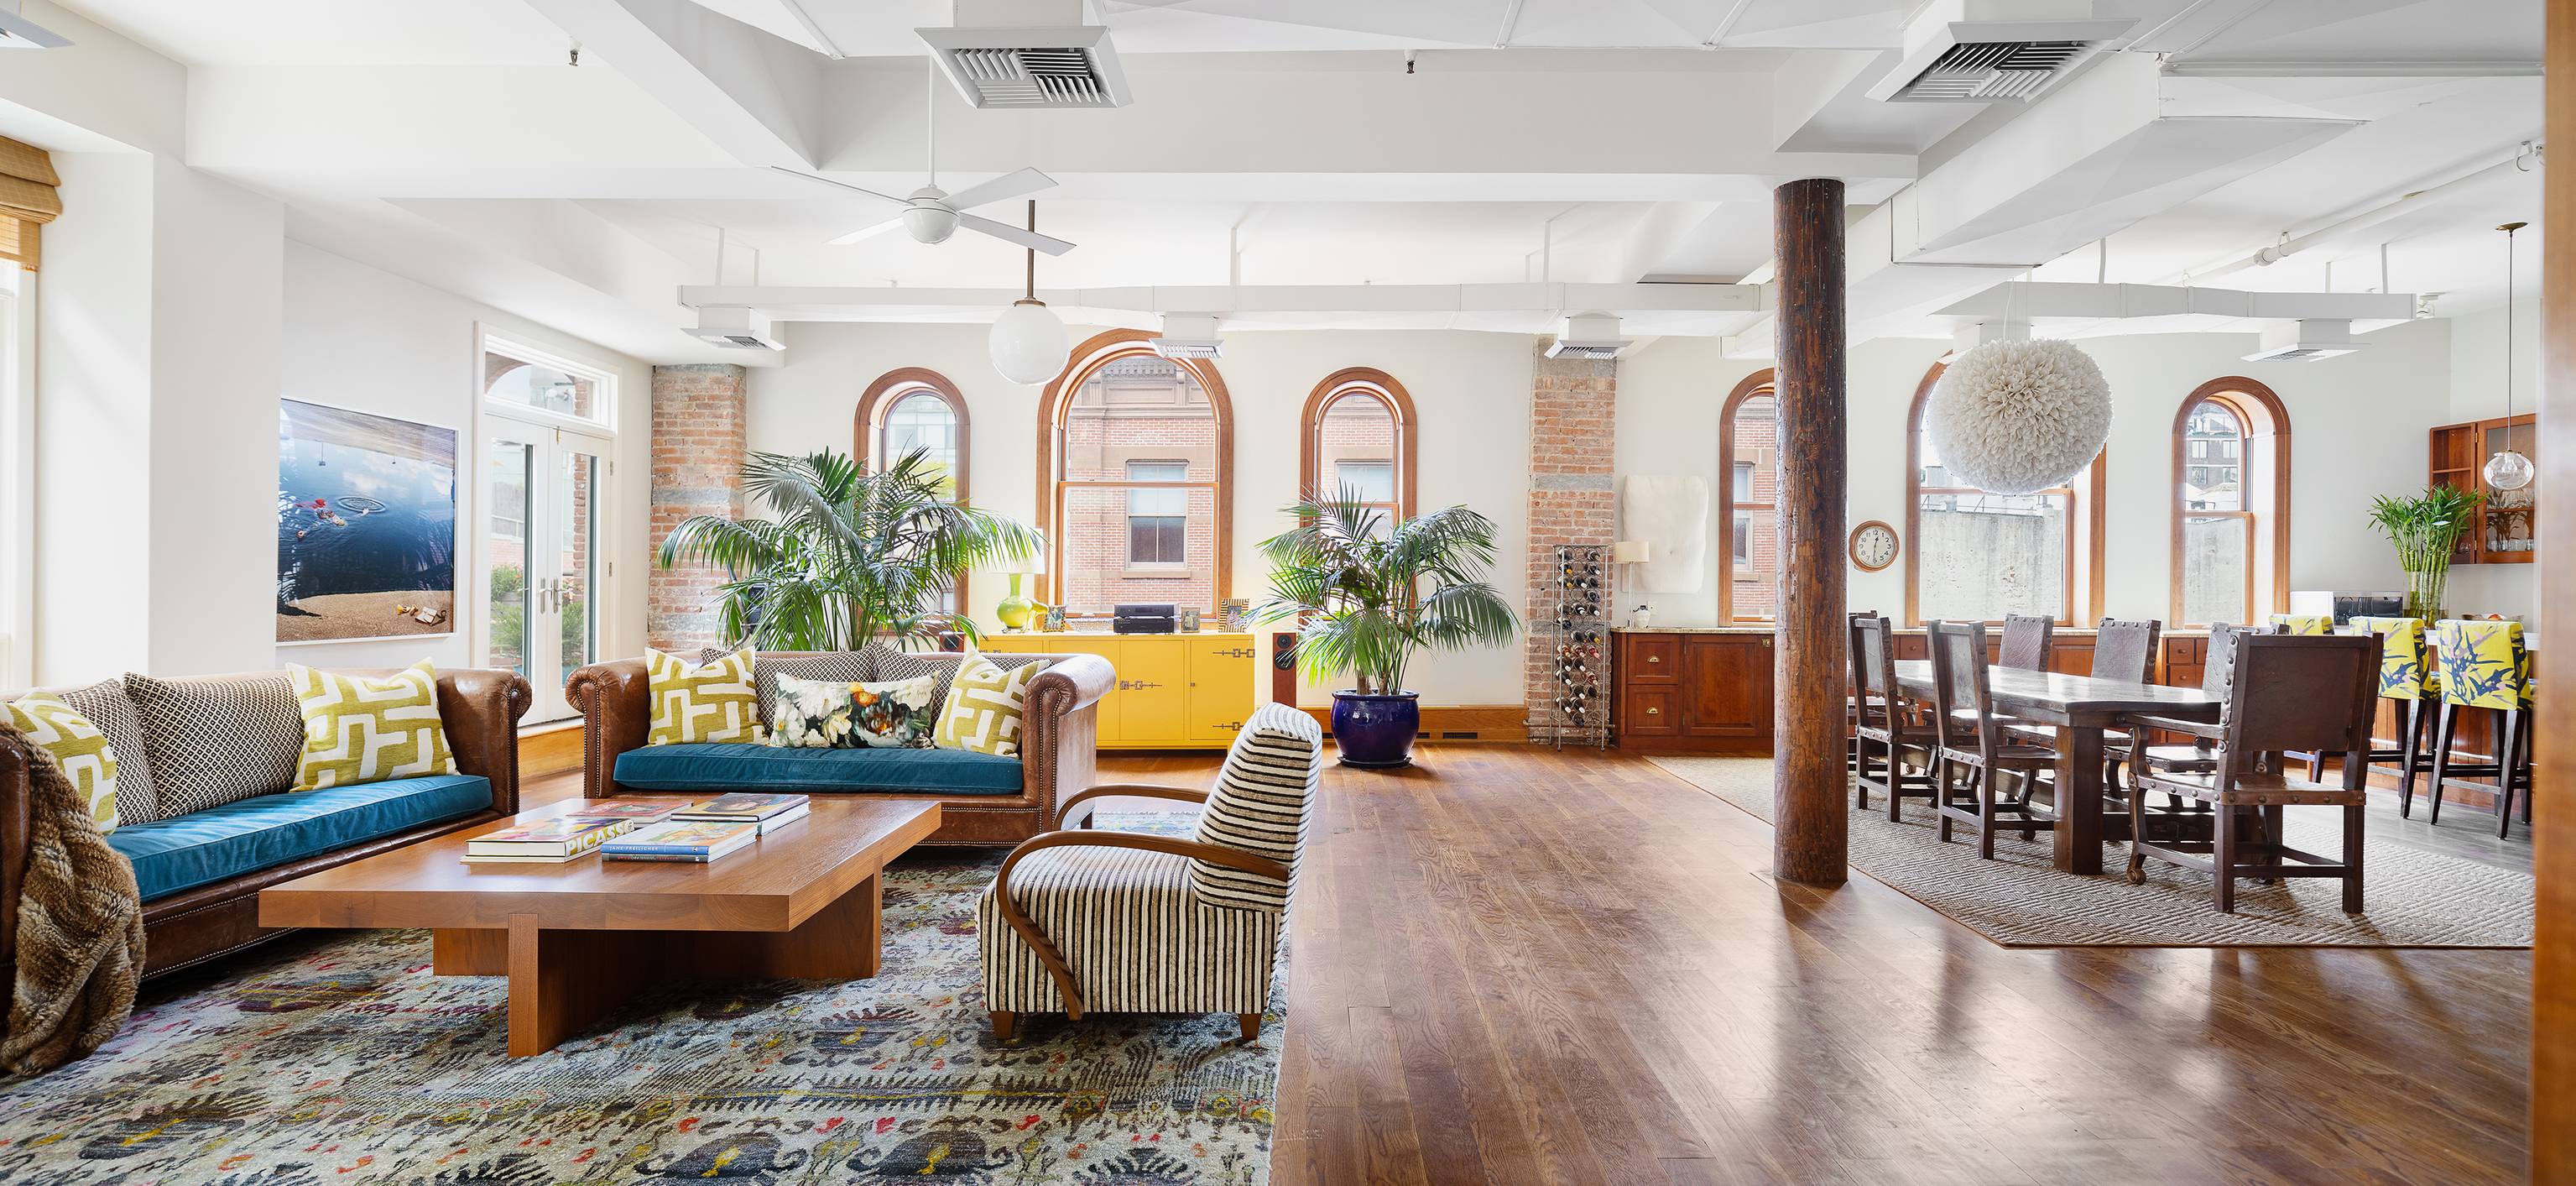 Once in a Generation SoHo Dream Loft Introducing this breathtaking SoHo loft available for the first time in 24 years, a sprawling sun splashed condo bestrewn with spacious rooms, intimate ...